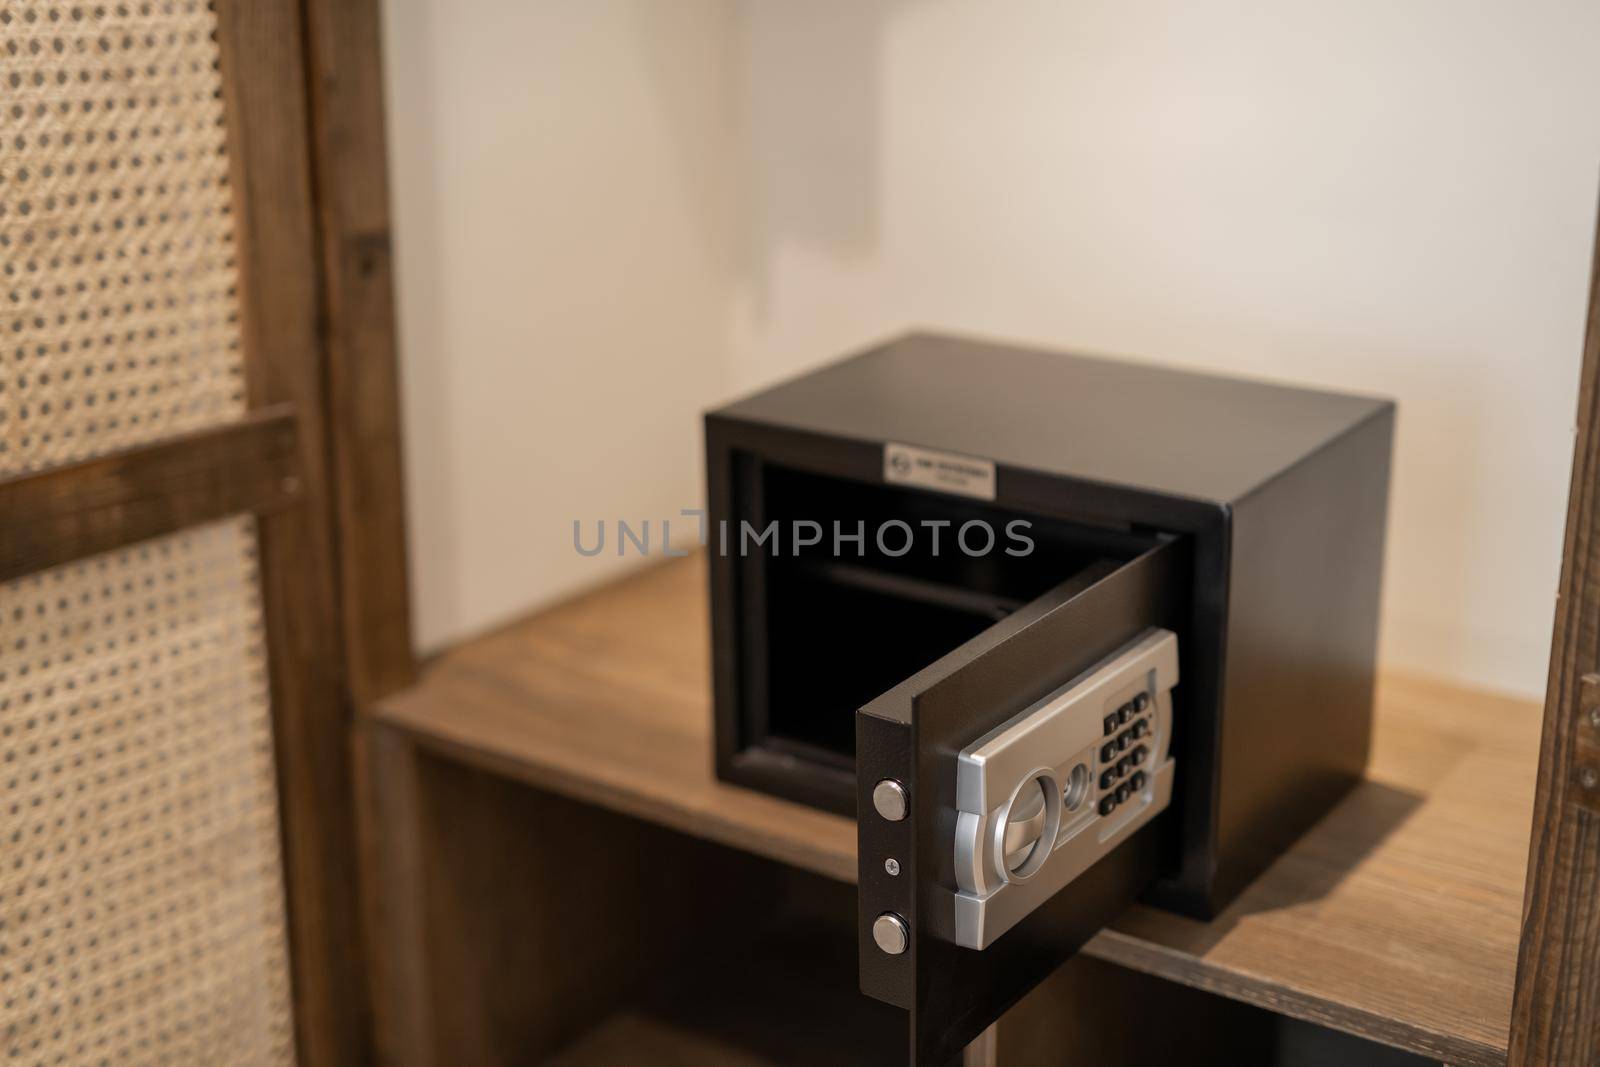 A hotel room safe for storing personal valuables